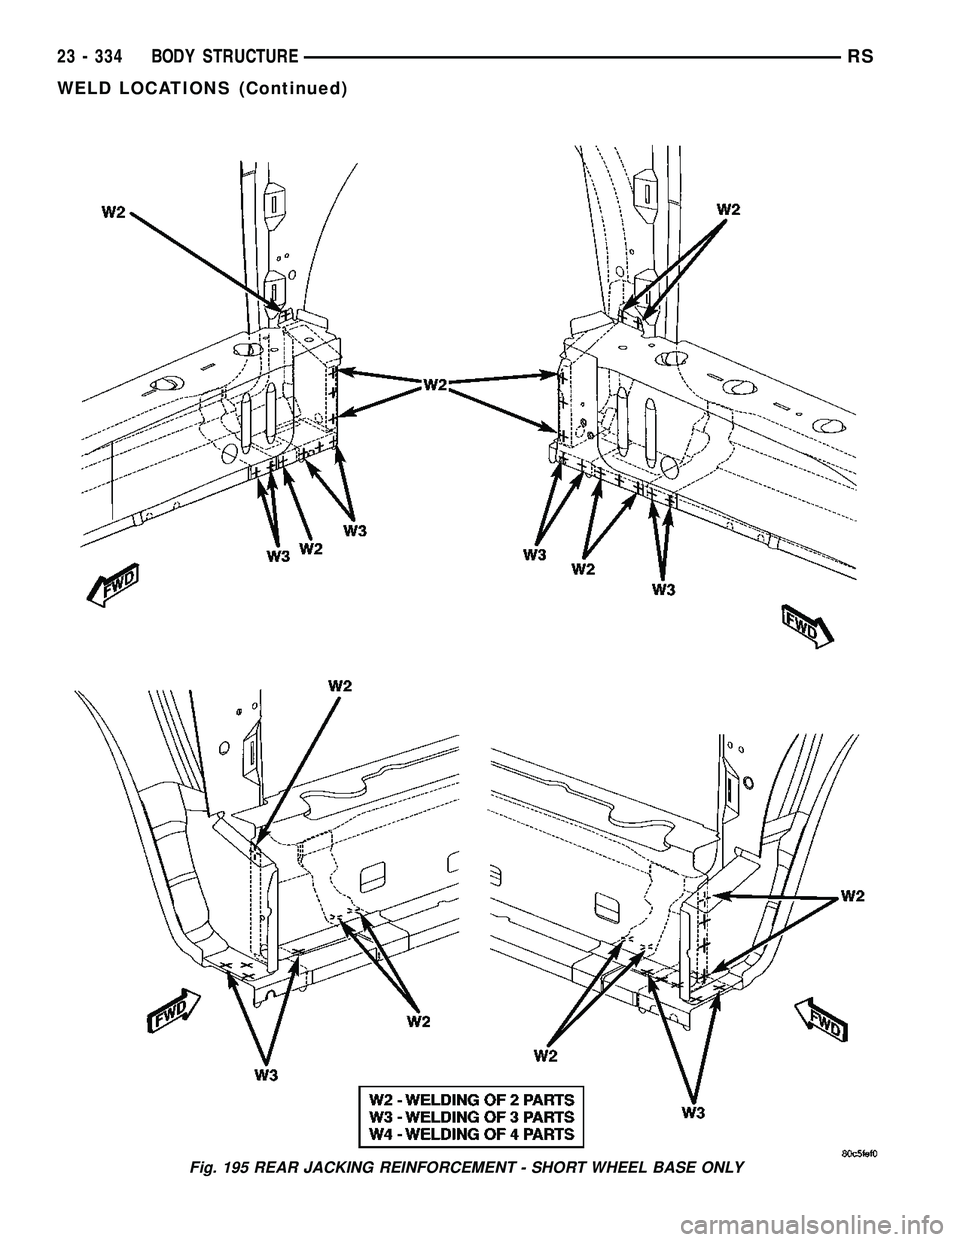 CHRYSLER VOYAGER 2005  Service Manual Fig. 195 REAR JACKING REINFORCEMENT - SHORT WHEEL BASE ONLY
23 - 334 BODY STRUCTURERS
WELD LOCATIONS (Continued) 